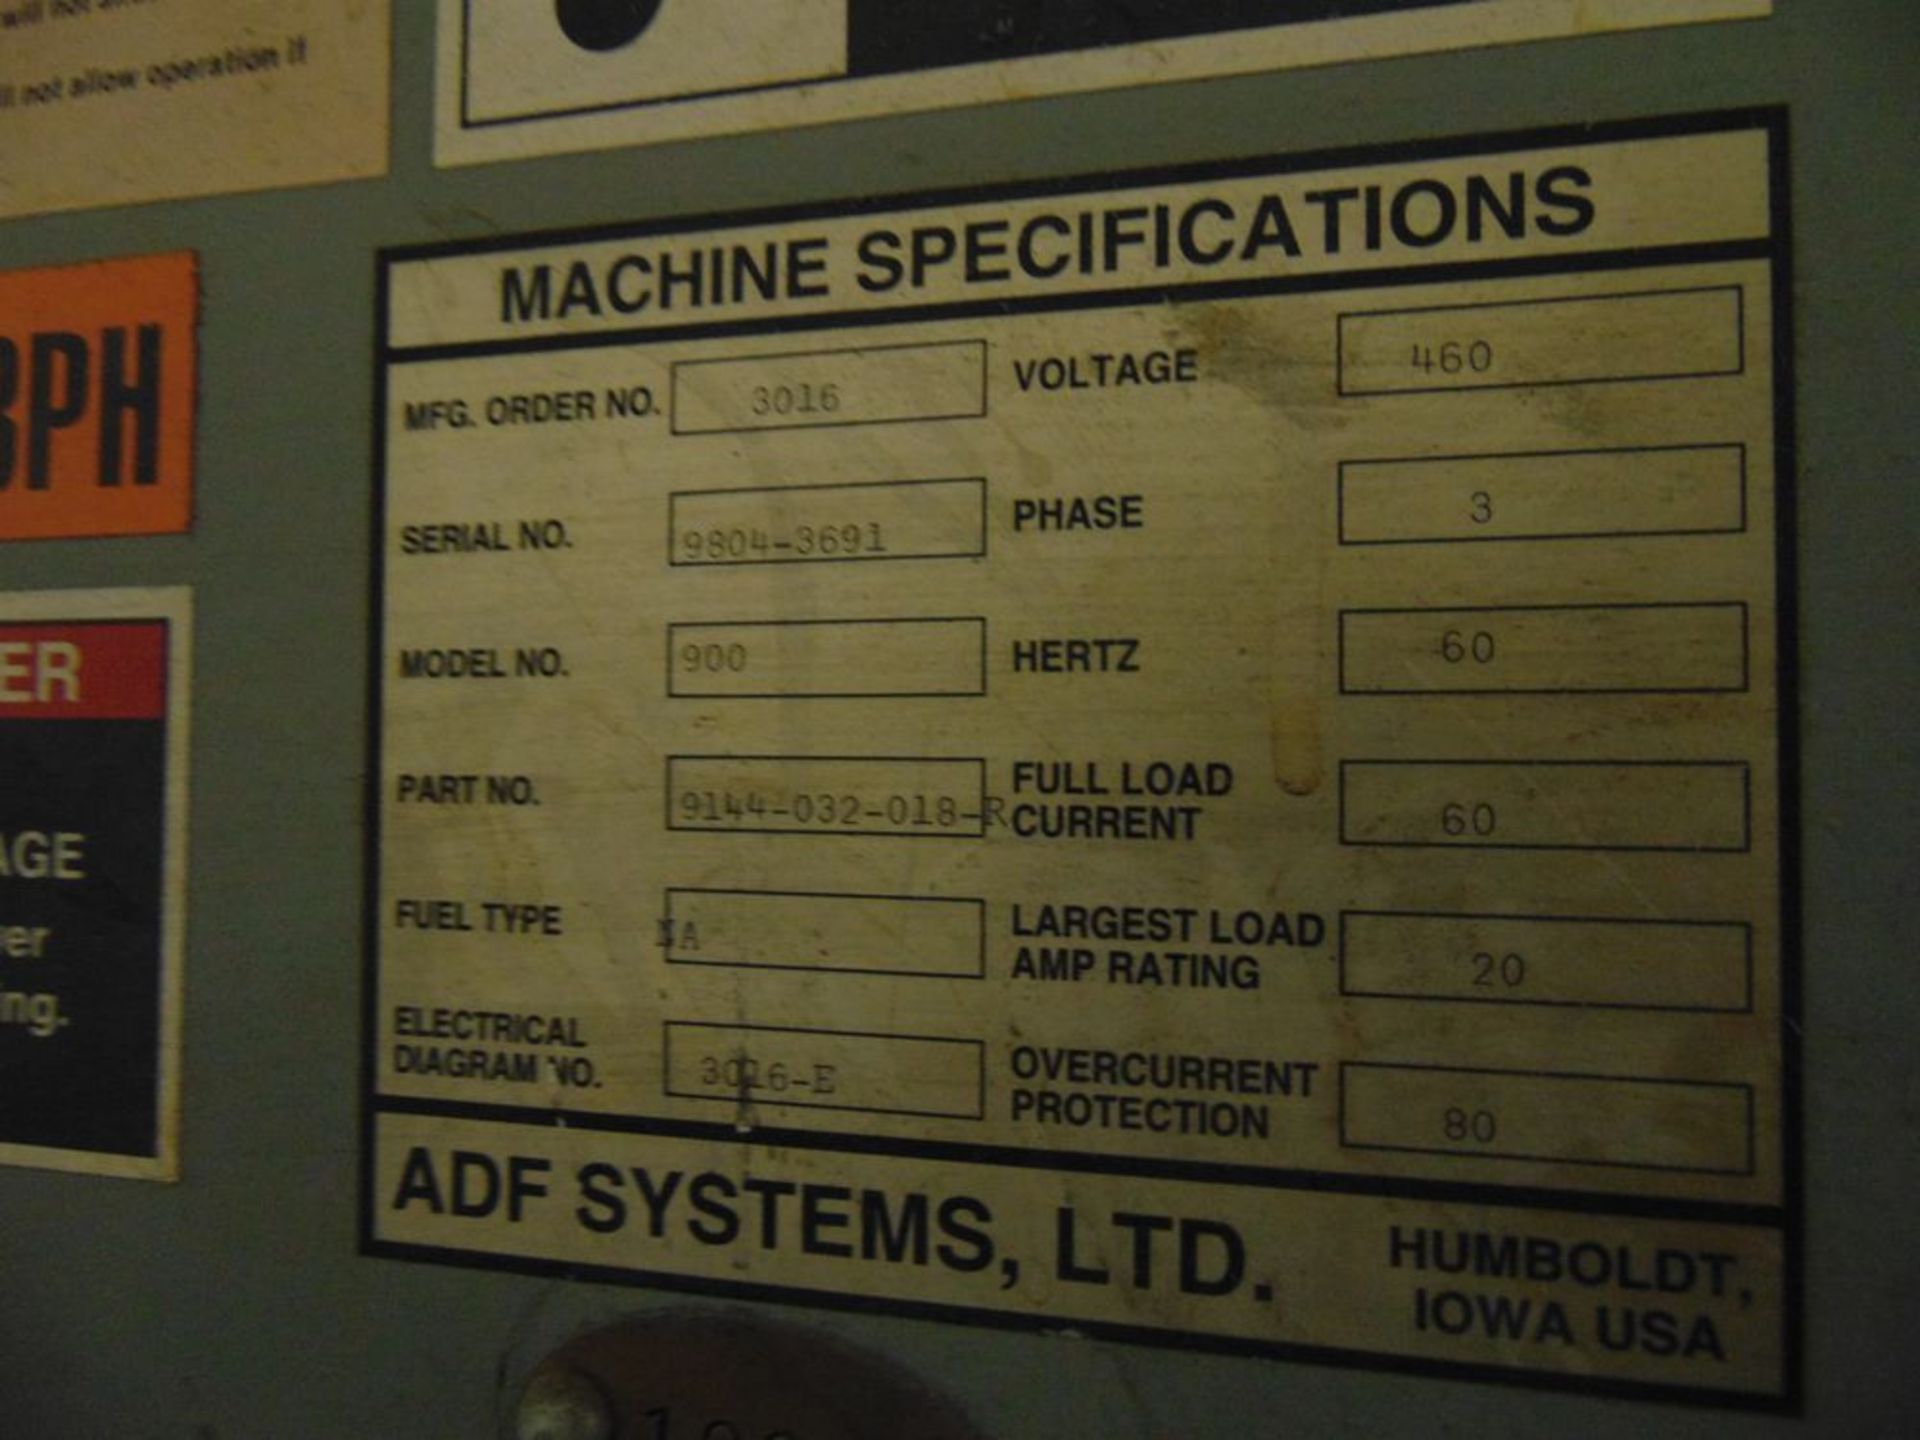 ADF Mod. 900 Parts Washer S/N 9804-3691 (LOADING FEES: $900) - Image 4 of 4